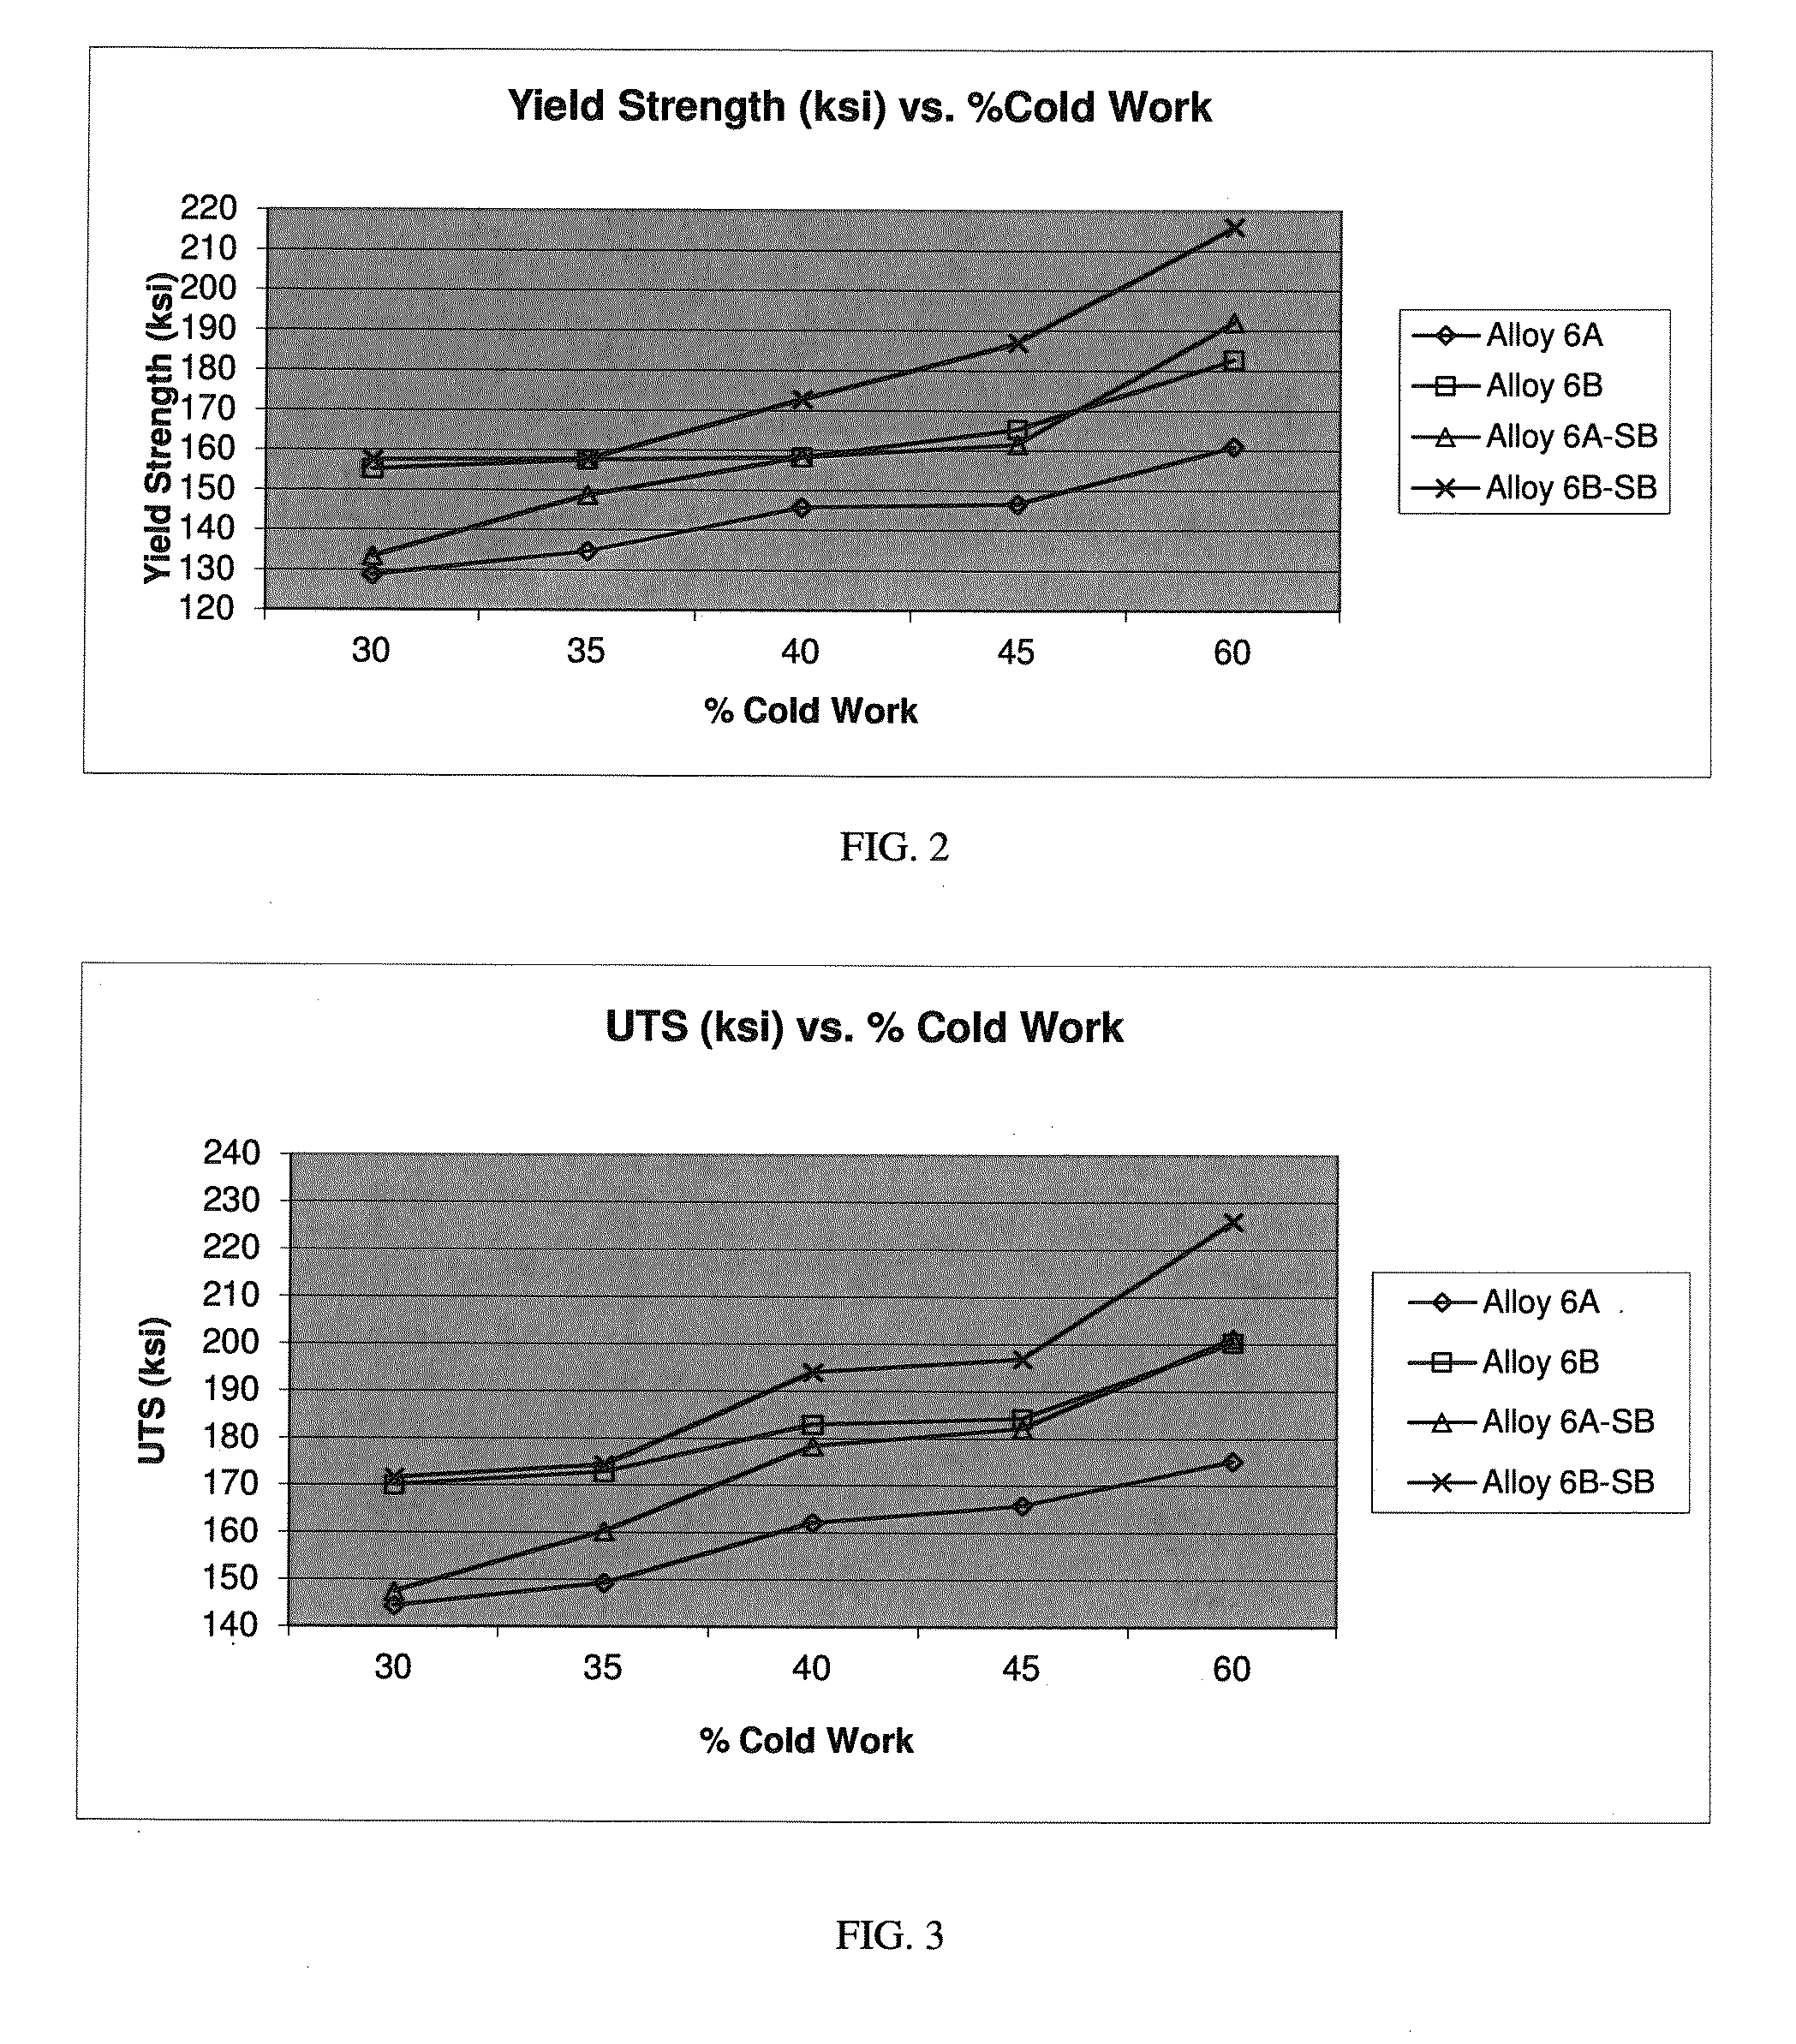 Nickel-Chromium-Iron-Molybdenum Corrosion Resistant Alloy and Article of Manufacture and Method of Manufacturing Thereof